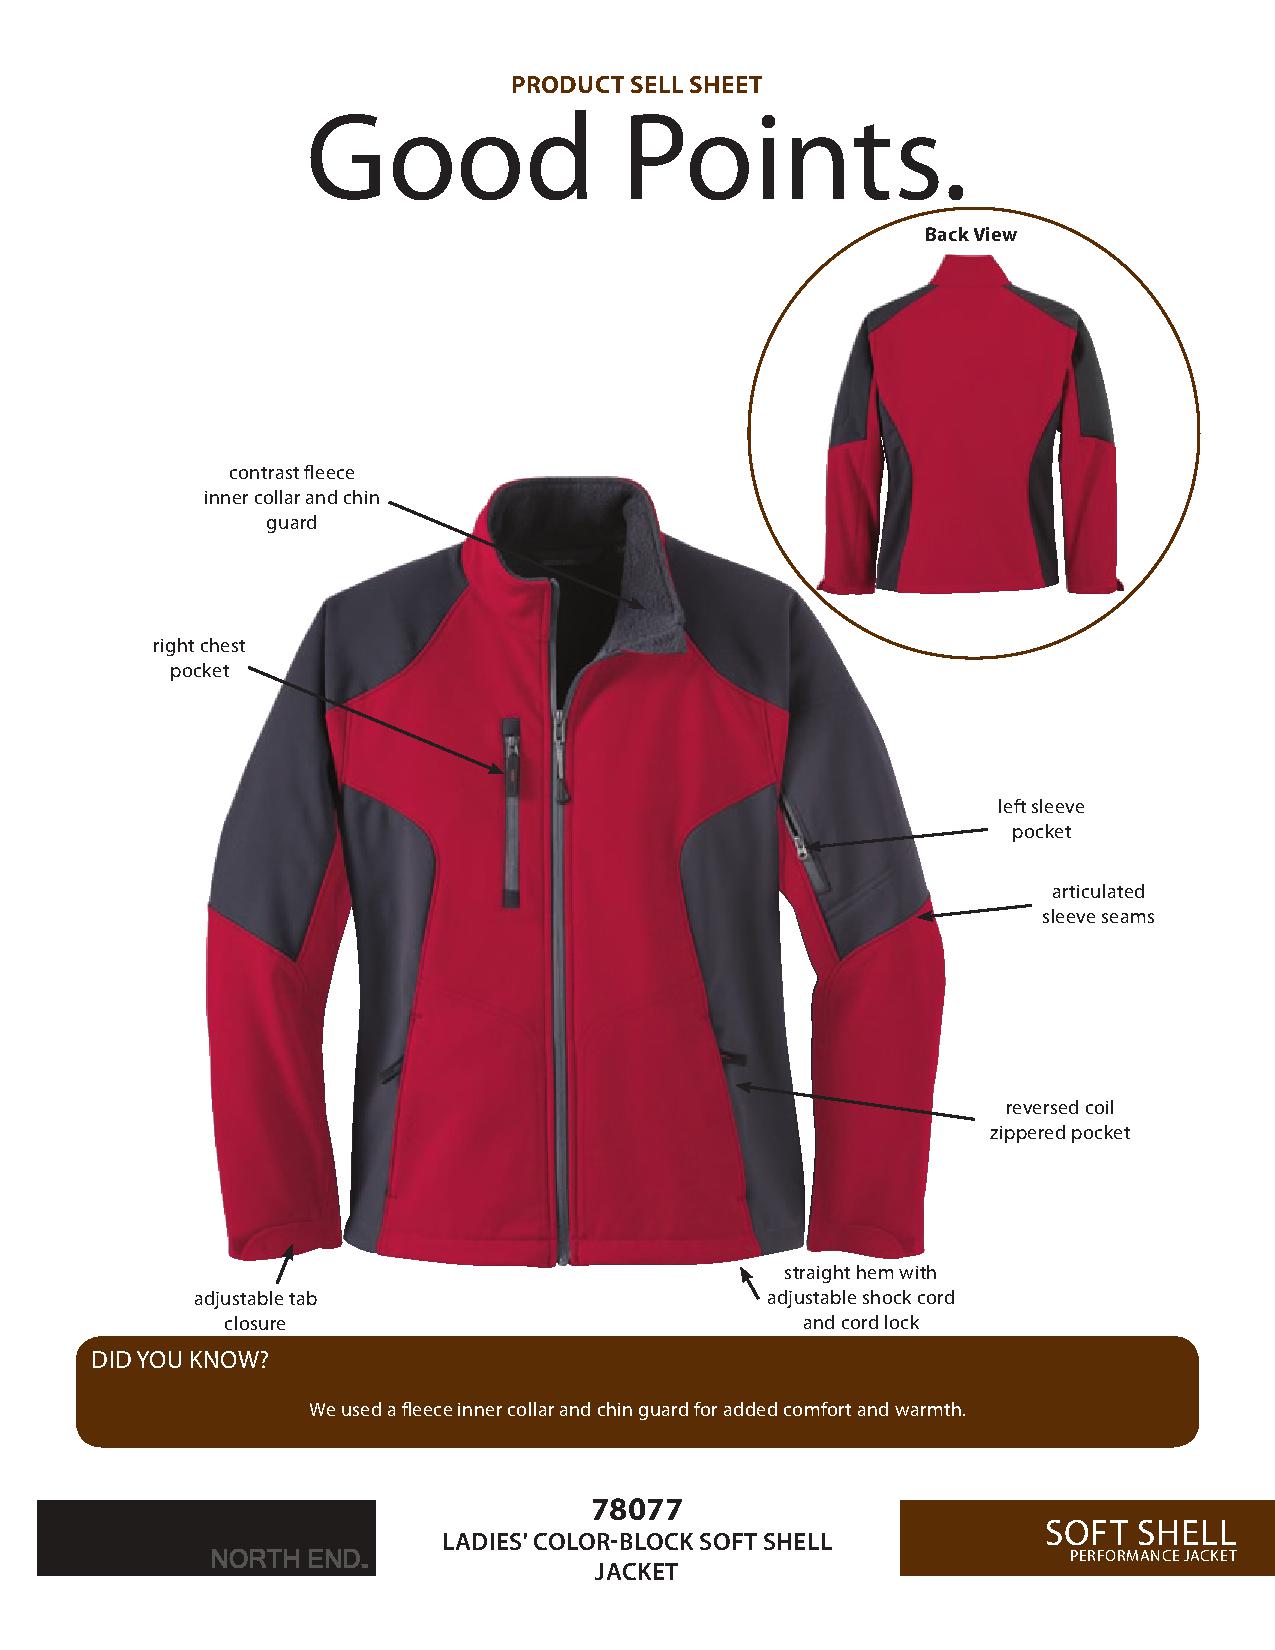 North End 78077 - Ladies' Compass Colorblock Three-Layer Fleece Bonded Soft Shell Jacket